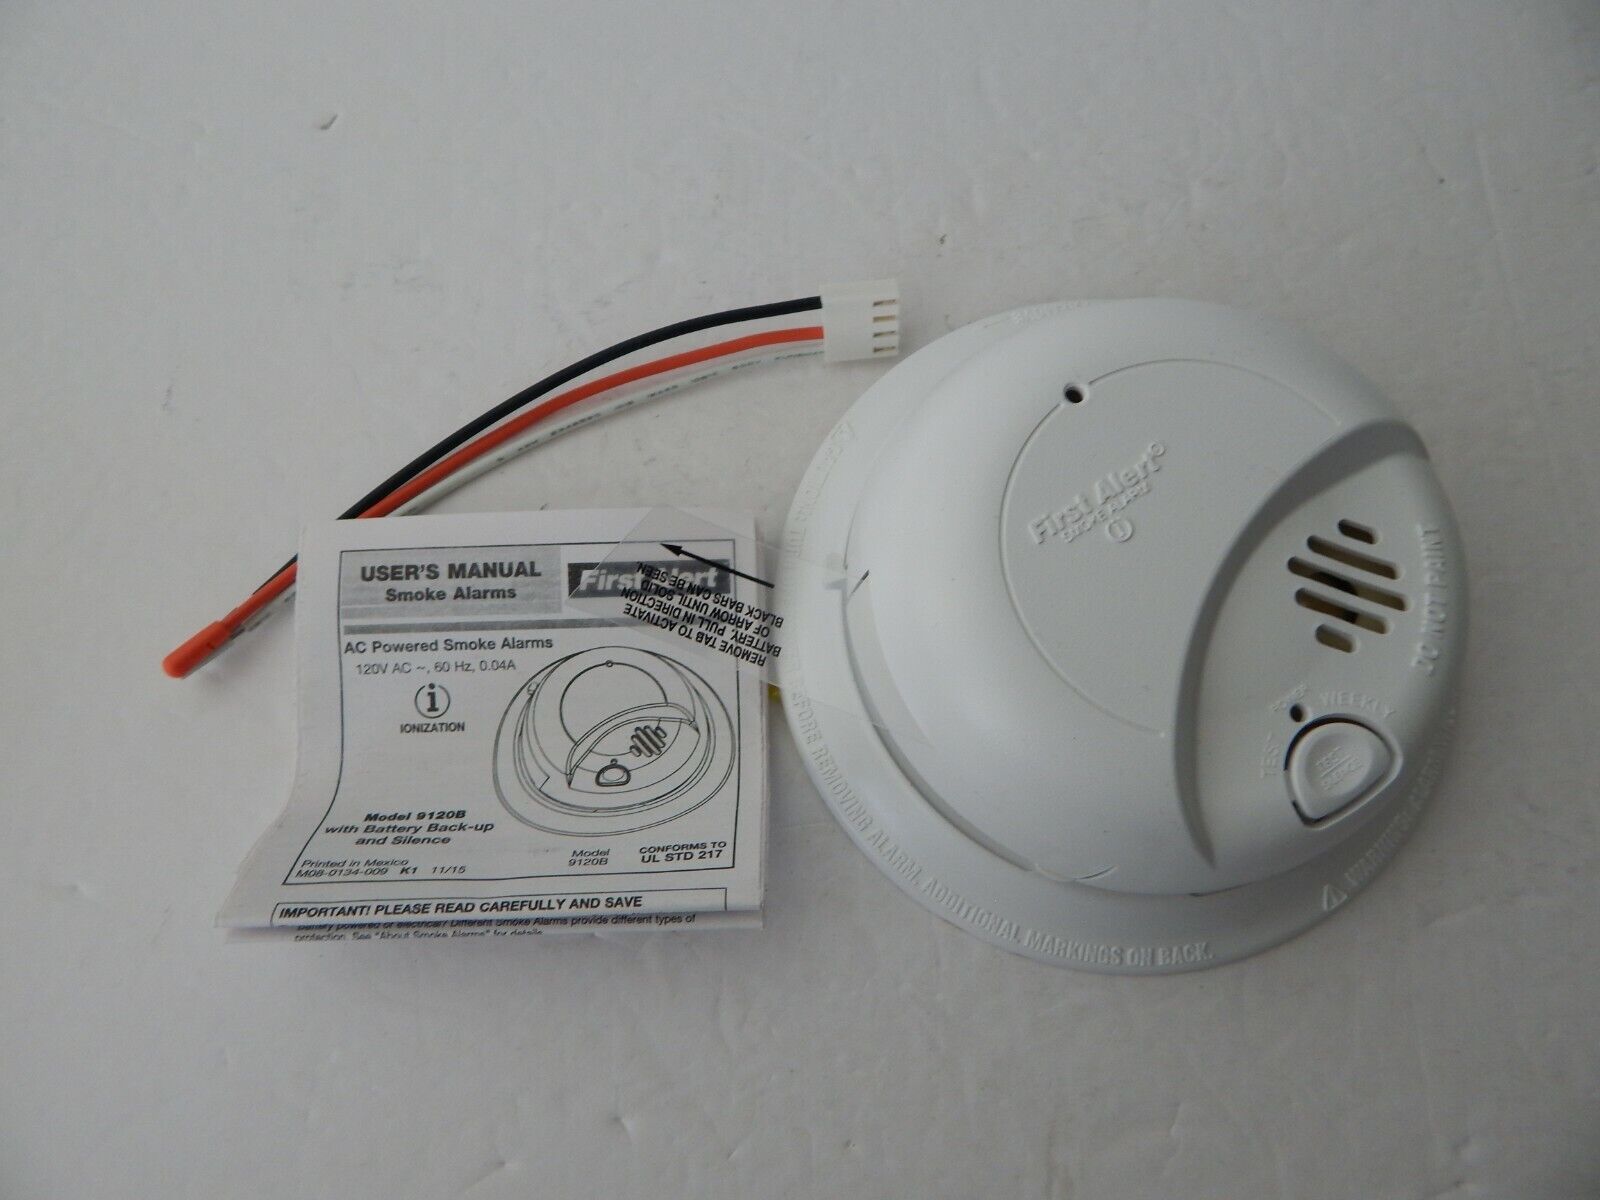 How To Pair A First Alert Smoke Detector